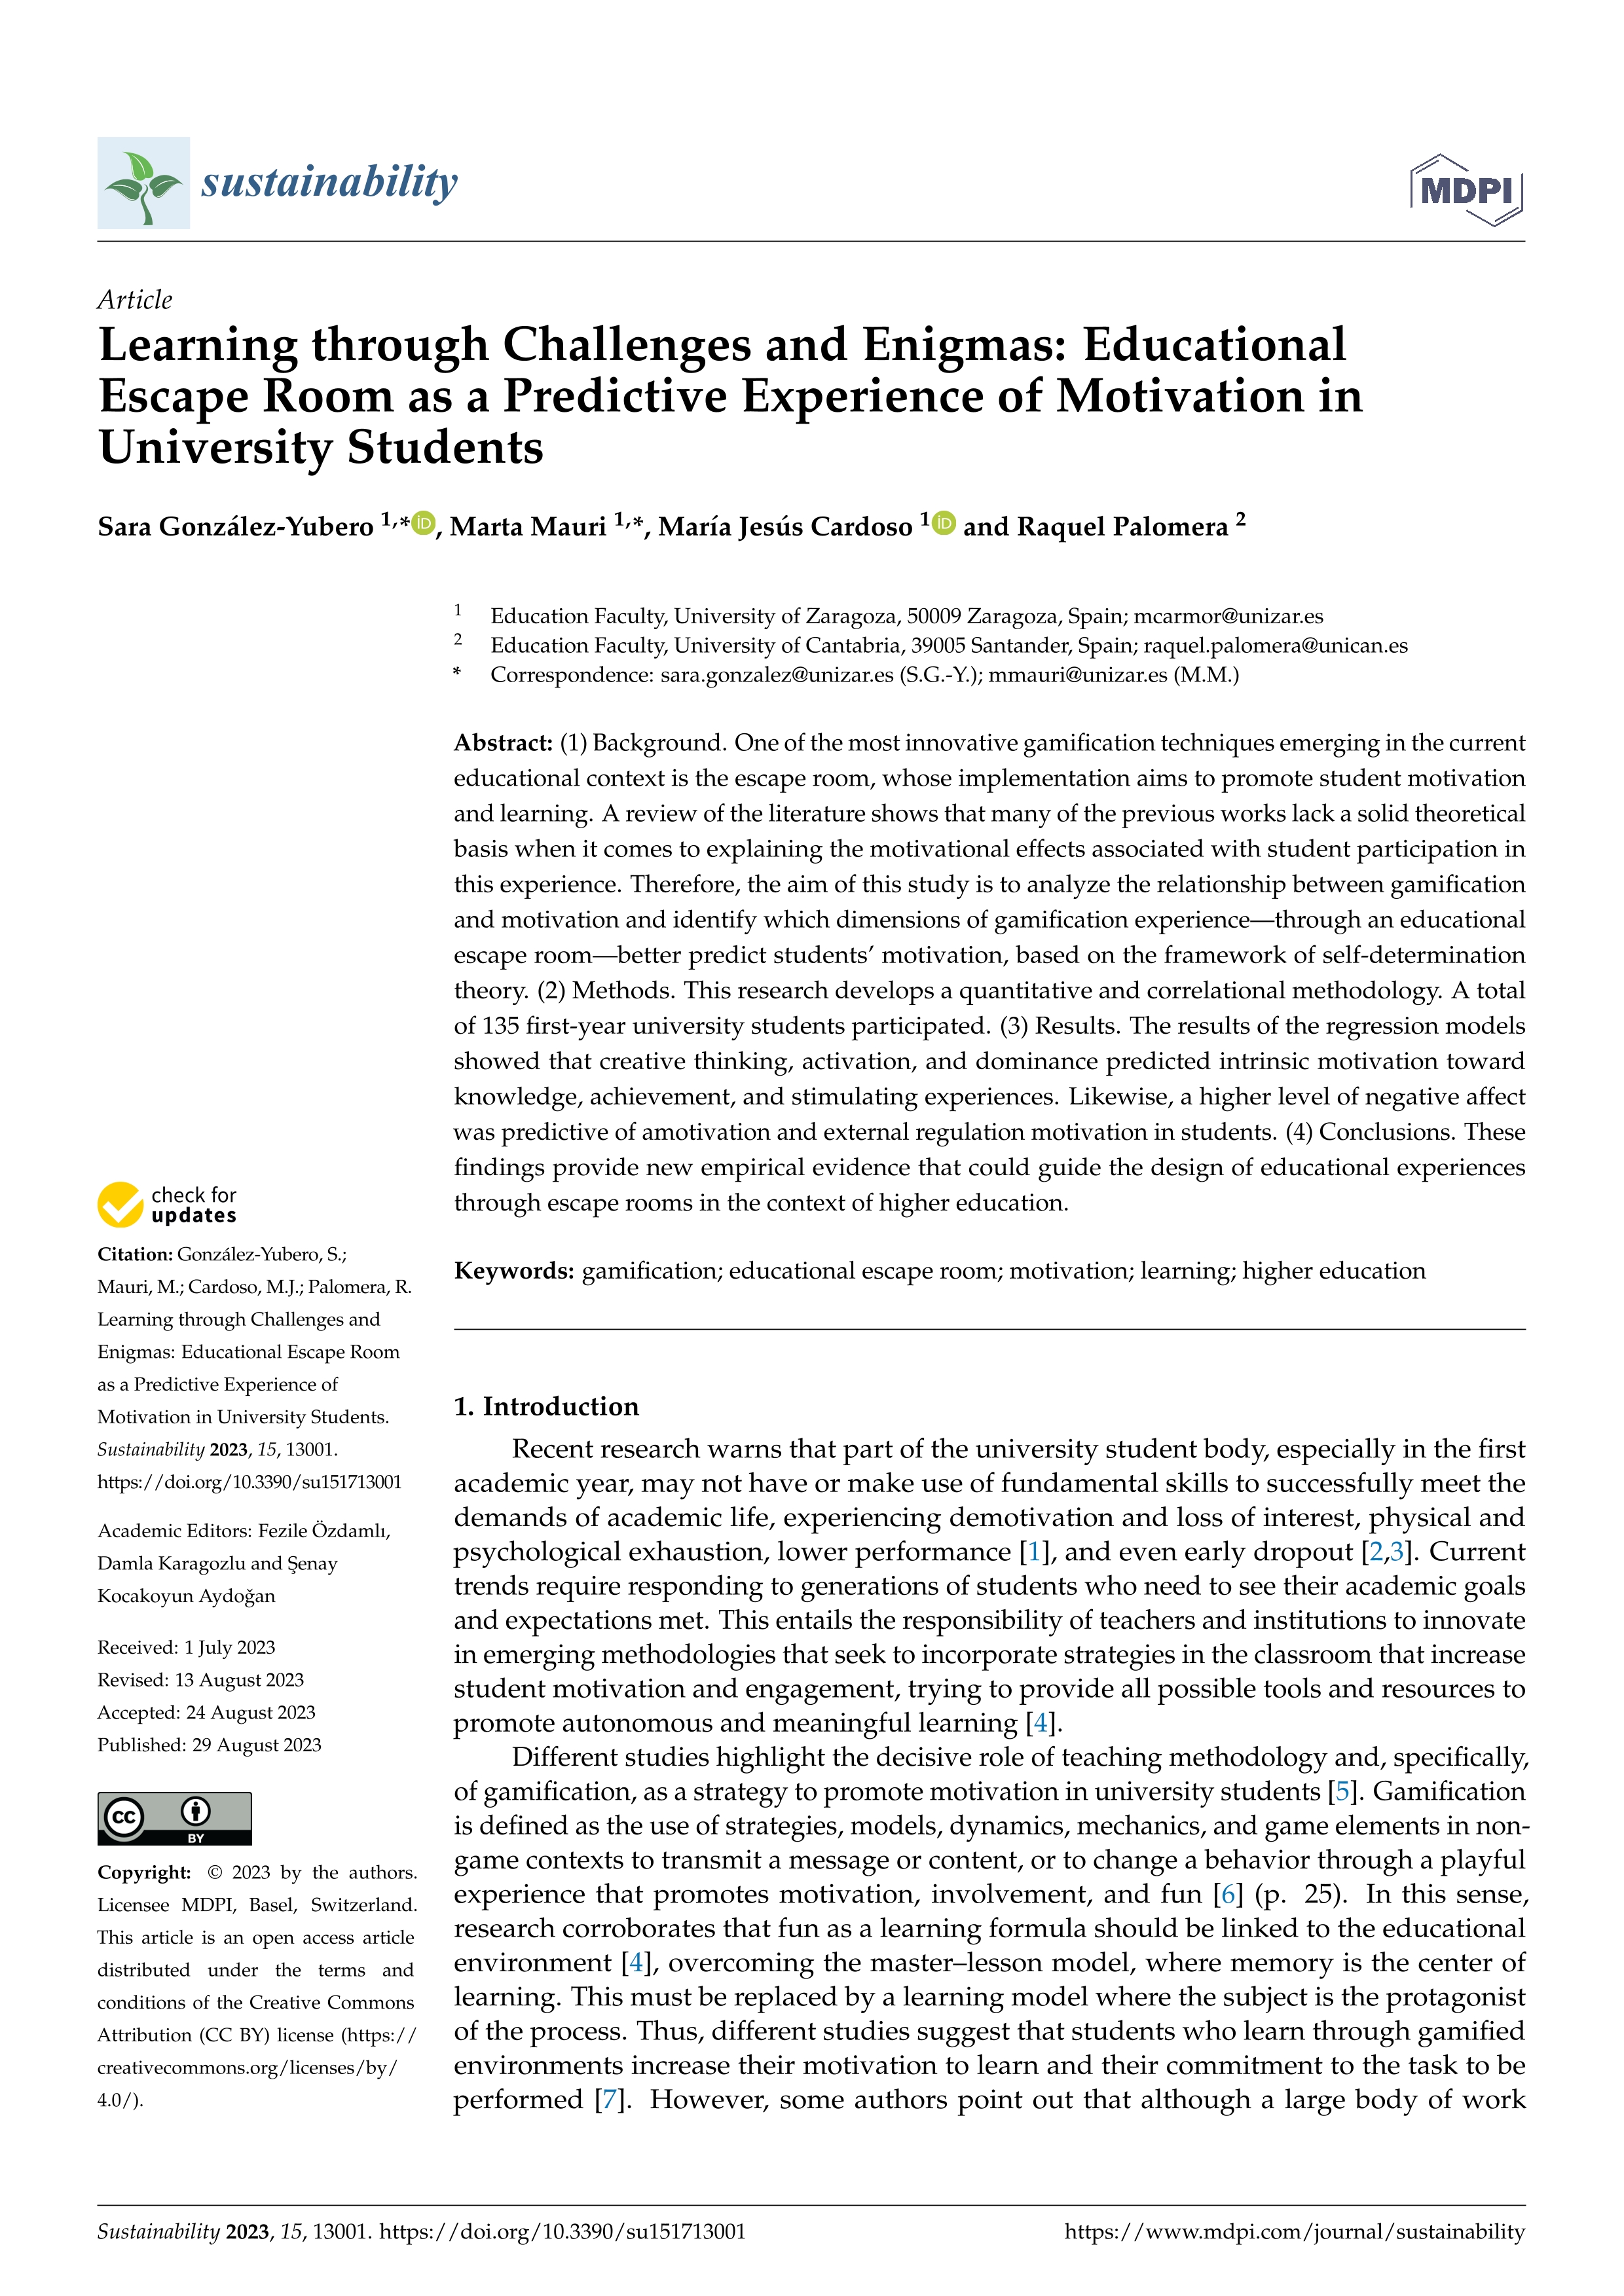 Learning through challenges and enigmas: educational escape room as a predictive experience of motivation in university students